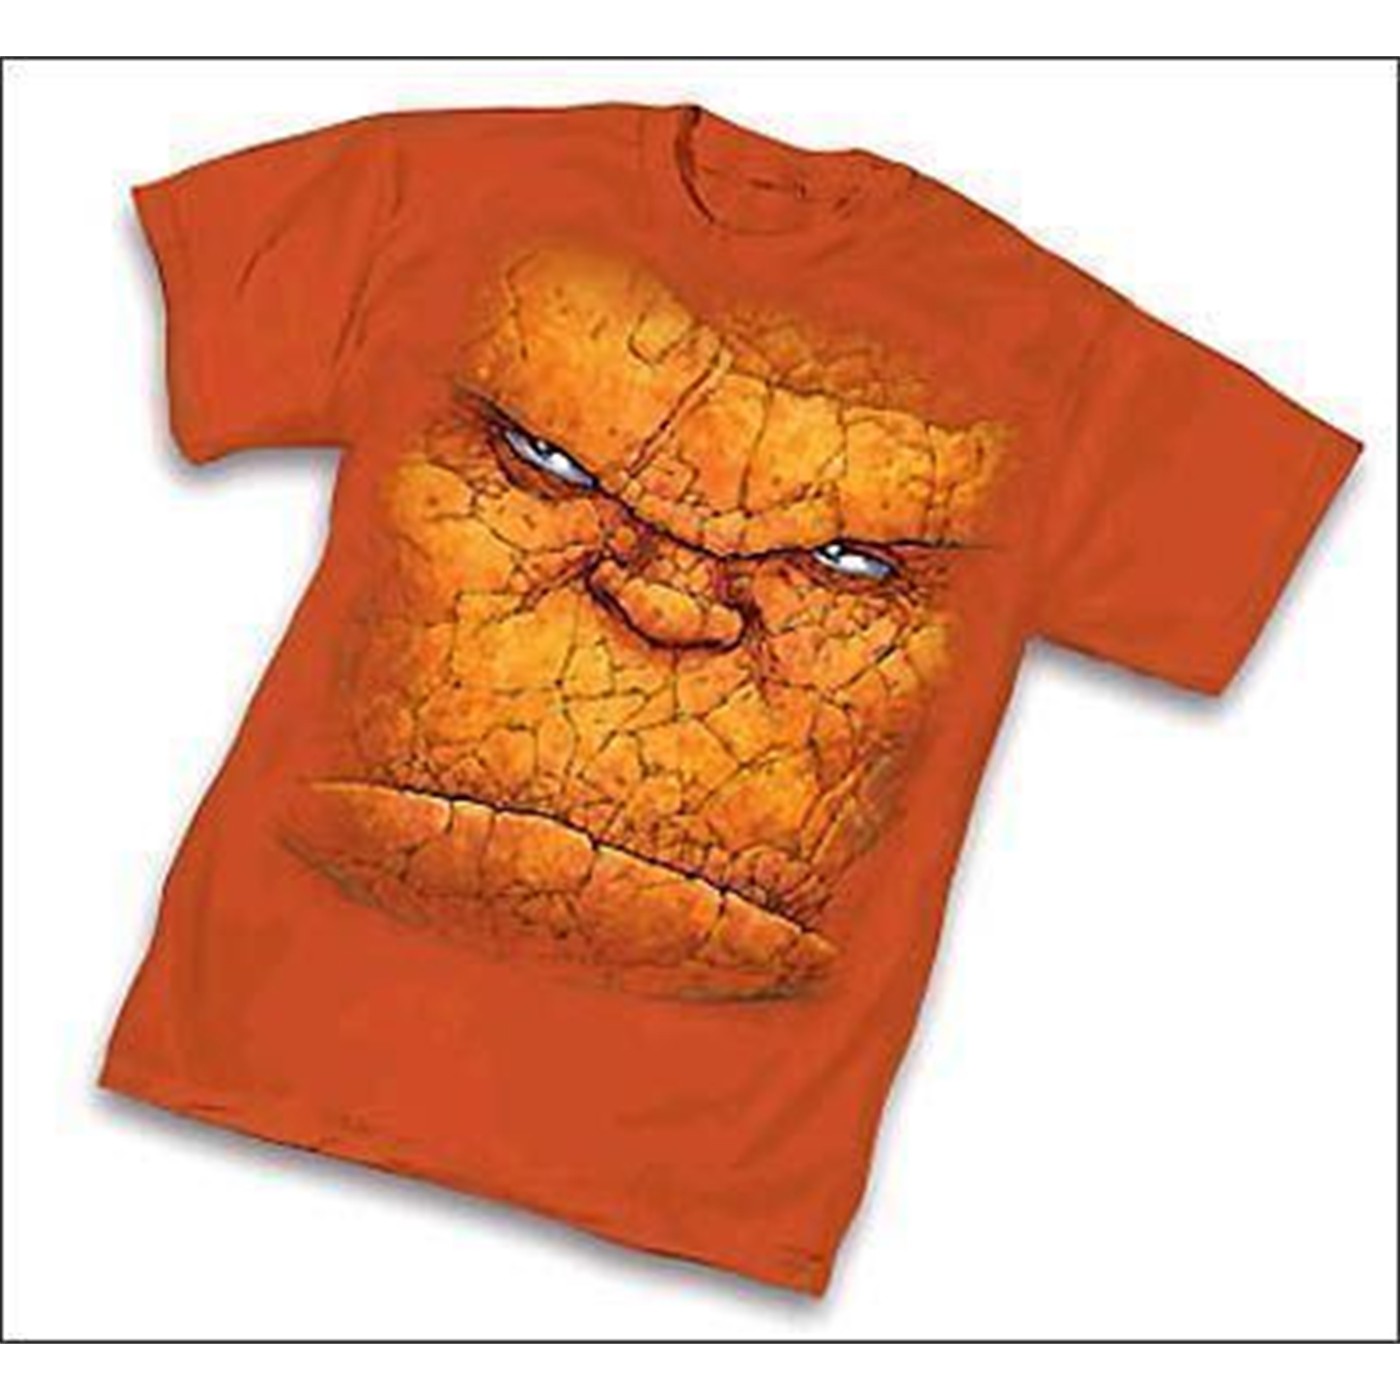 The Thing Face T-Shirt